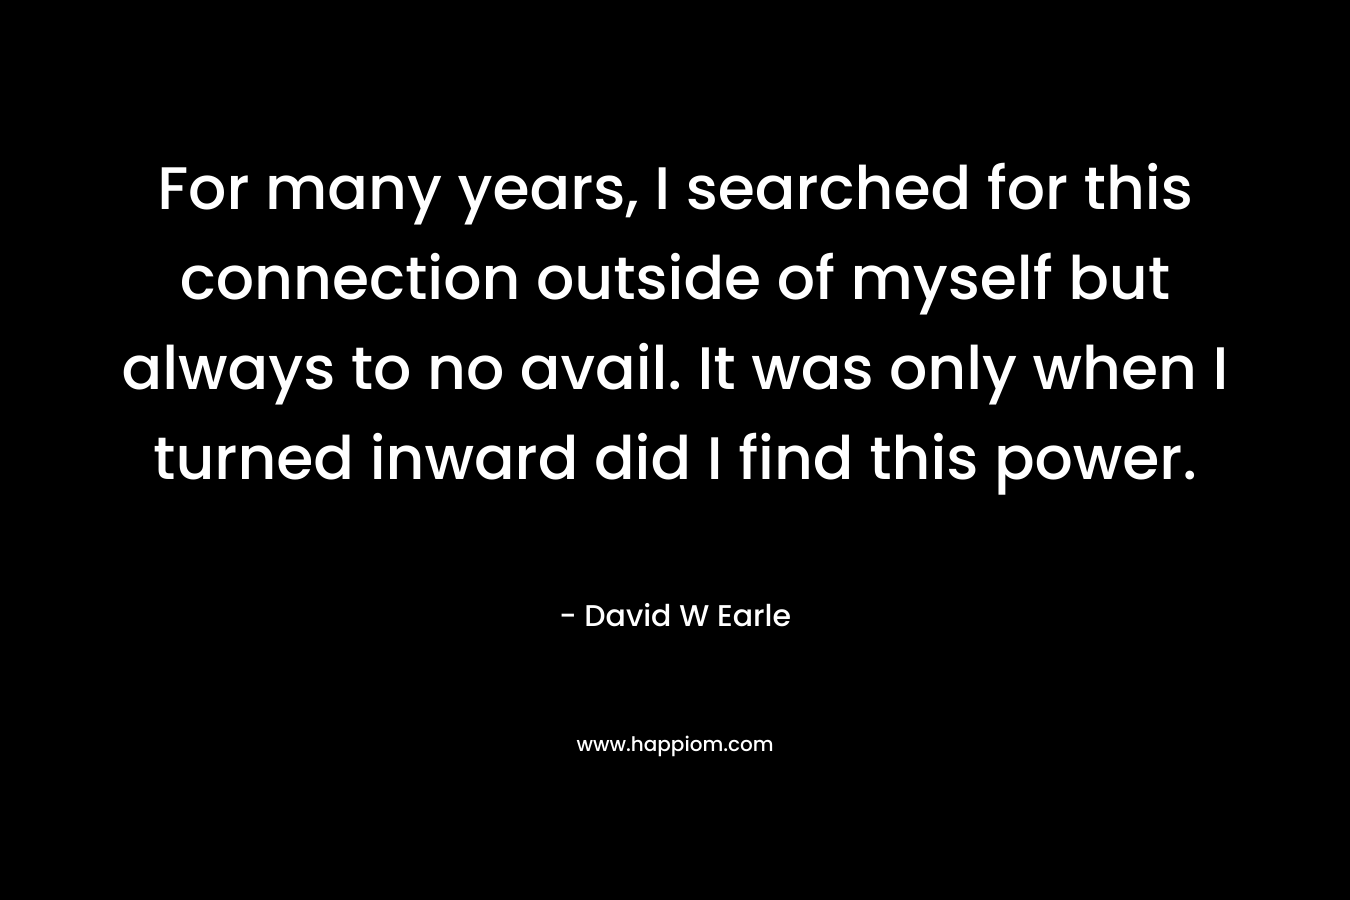 For many years, I searched for this connection outside of myself but always to no avail. It was only when I turned inward did I find this power. – David W Earle